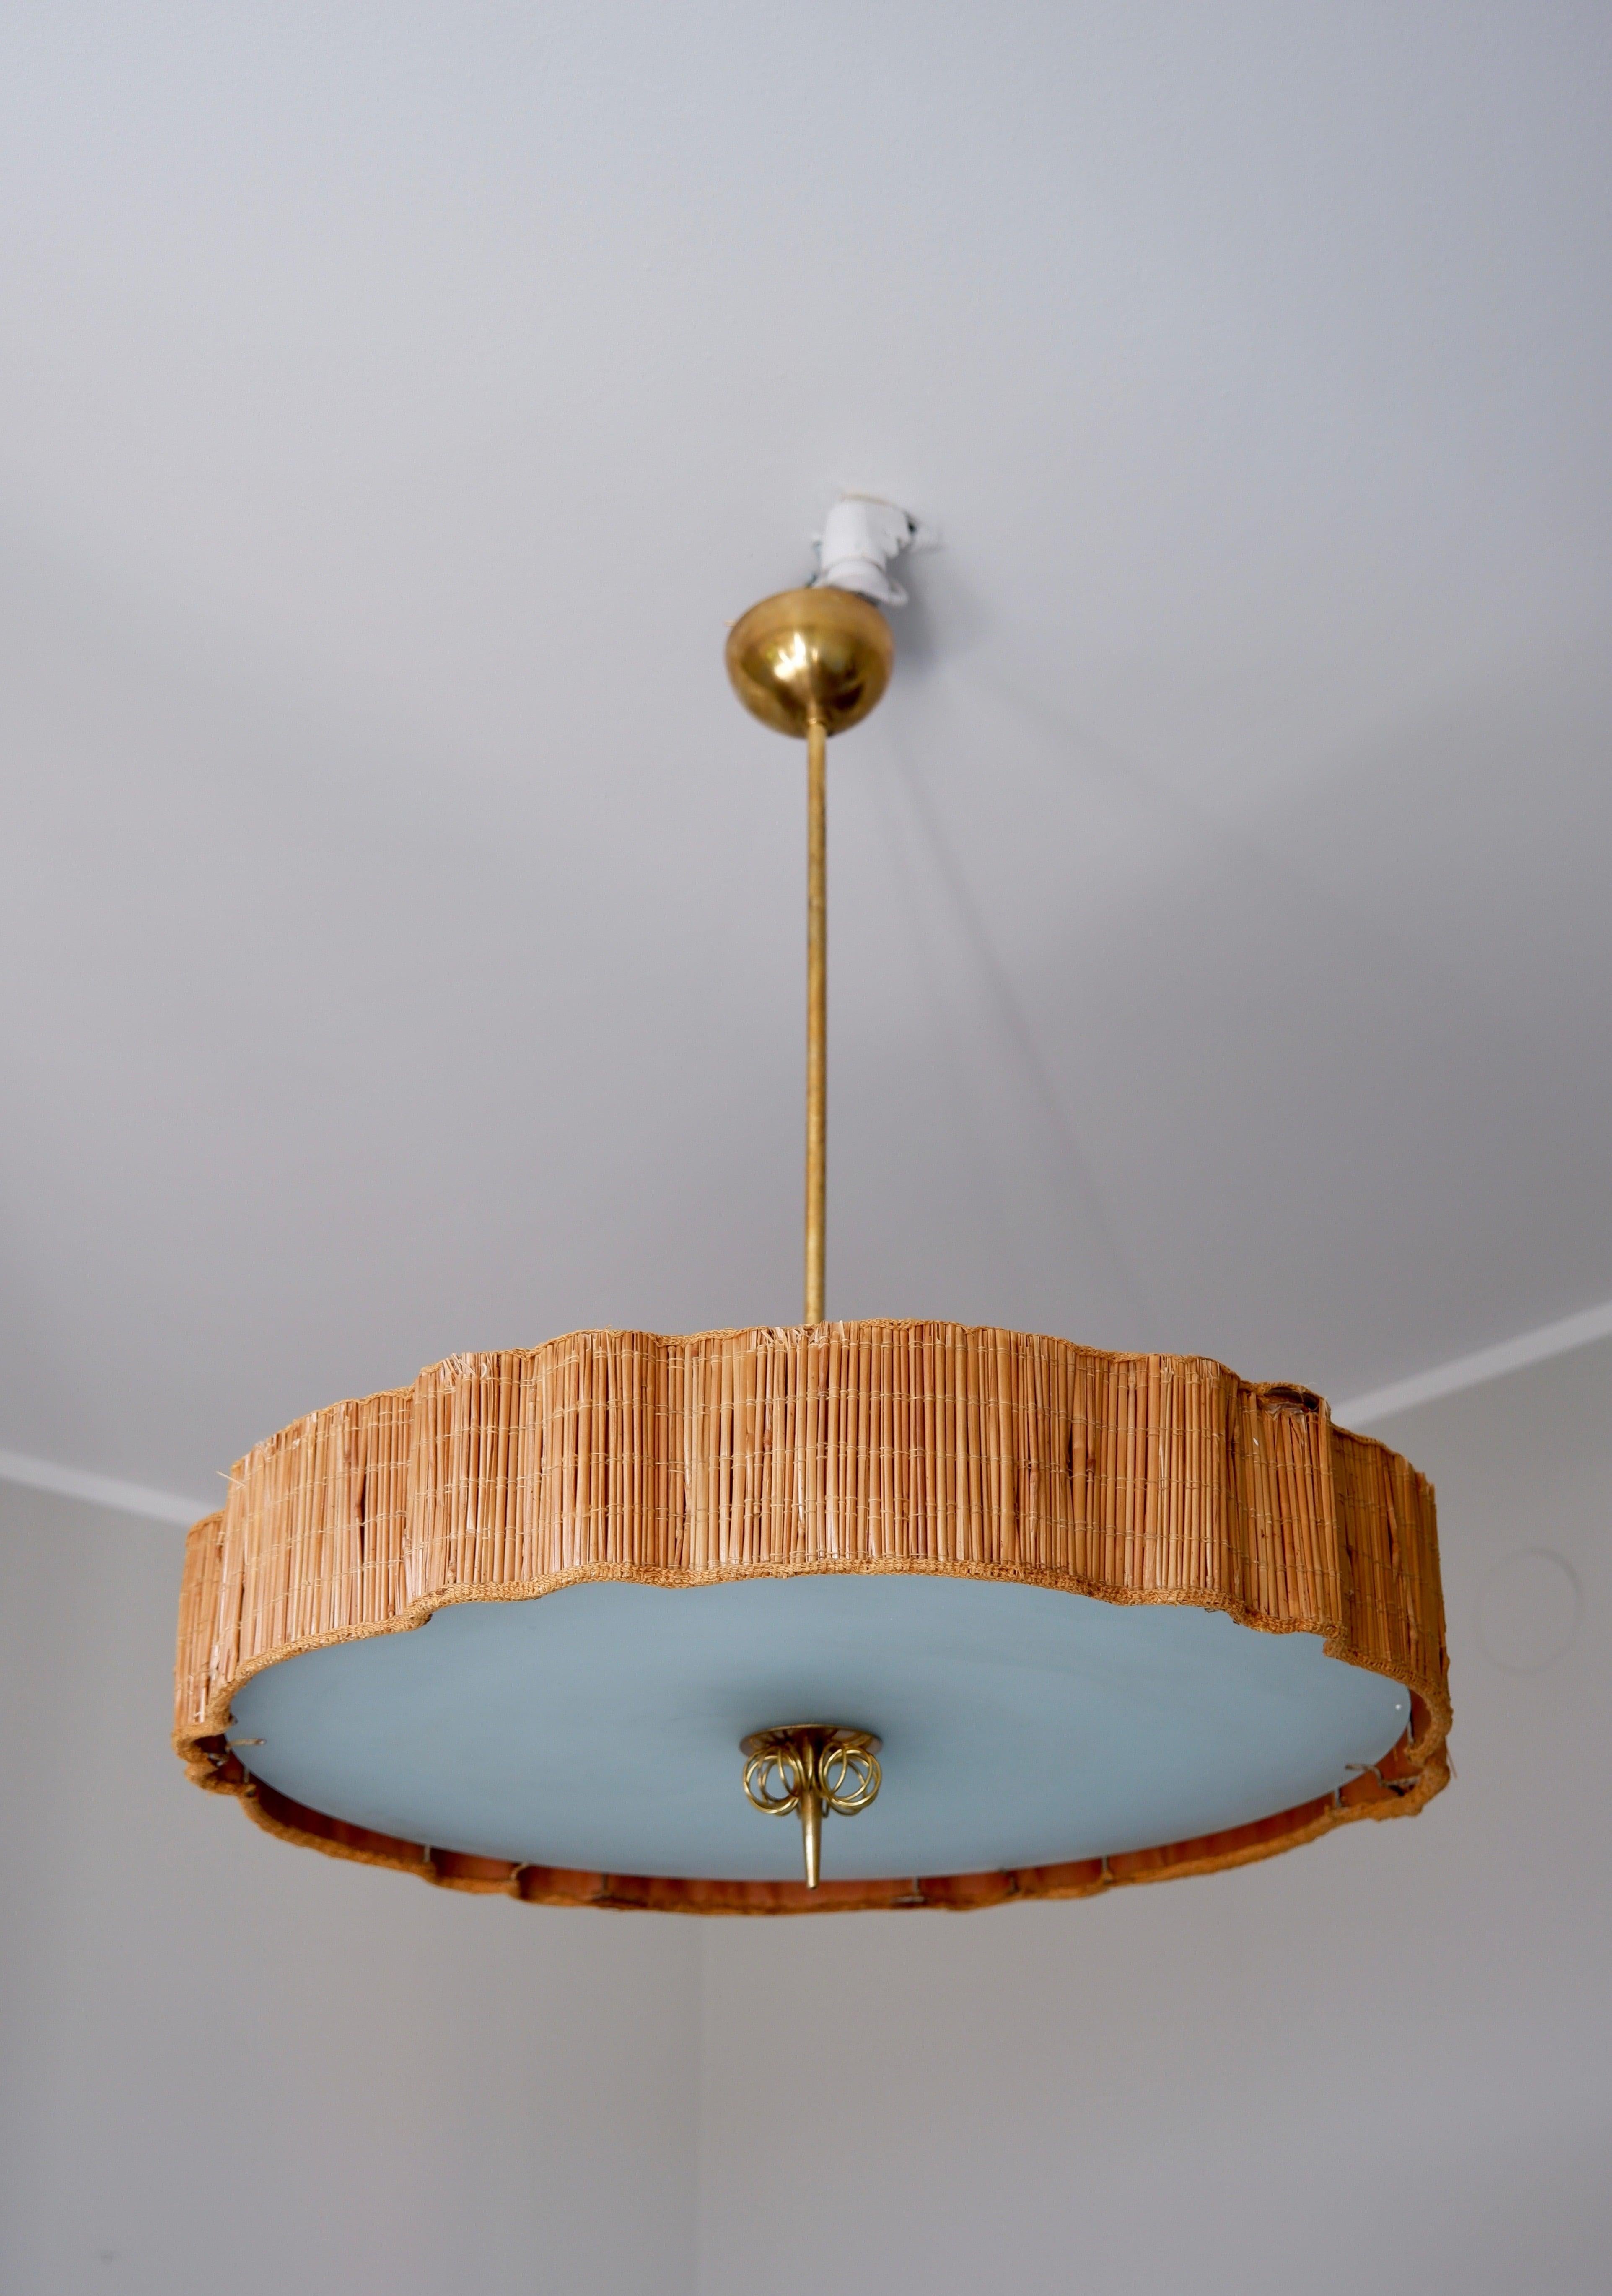 Nice Paavo Tynell ceiling ligth made with rattan straw shade, glass and brass. This lamp is using every aspect of Paavo Tynell style, the straw rattan shade preserves scandinavian tradition, both the glass and the brass brings a modernity aspect to